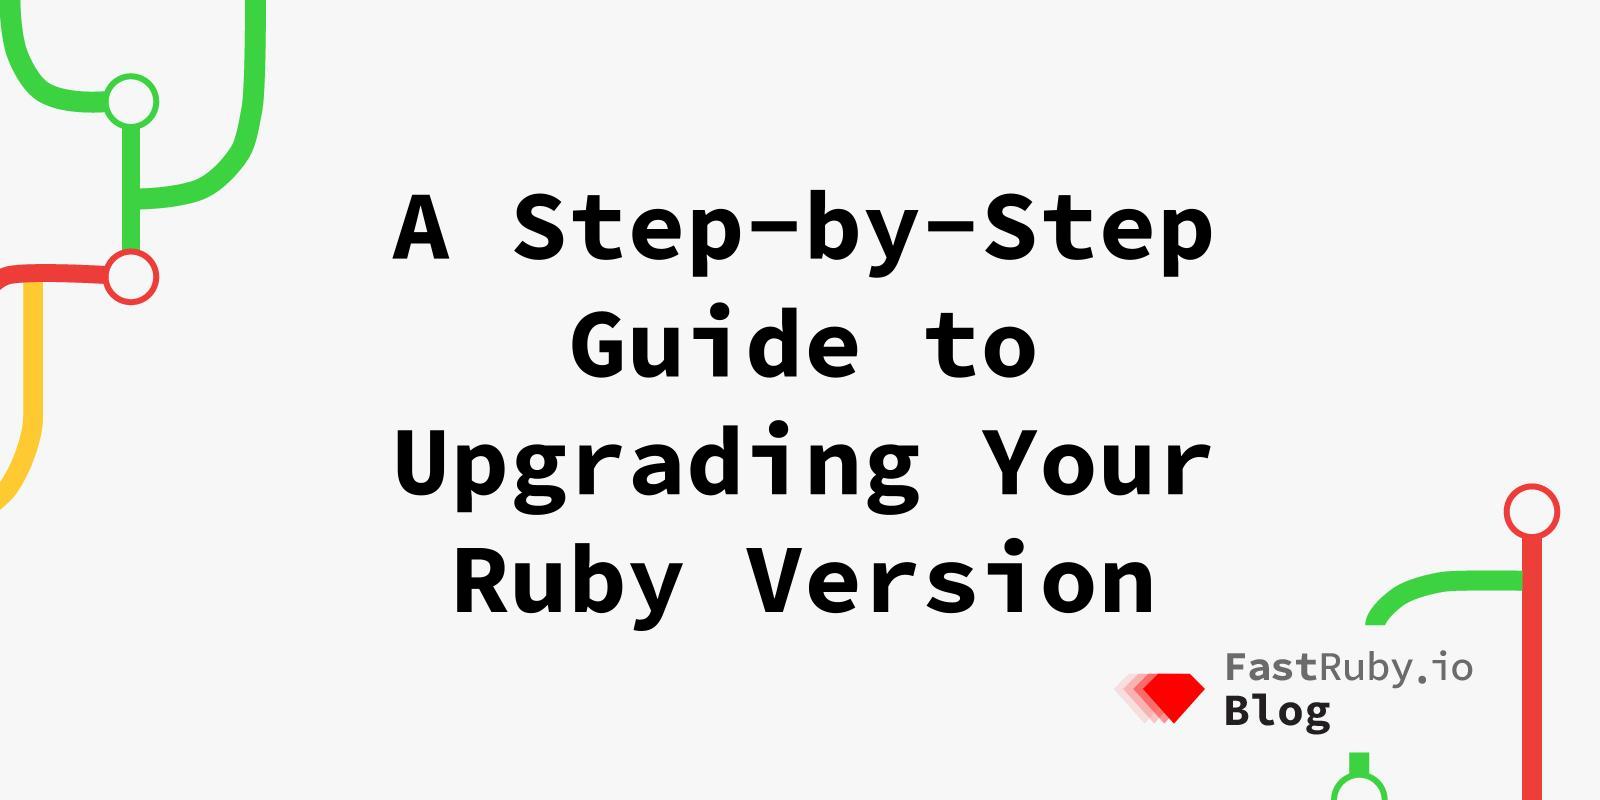 A Step-by-Step Guide to Upgrading Your Ruby Version